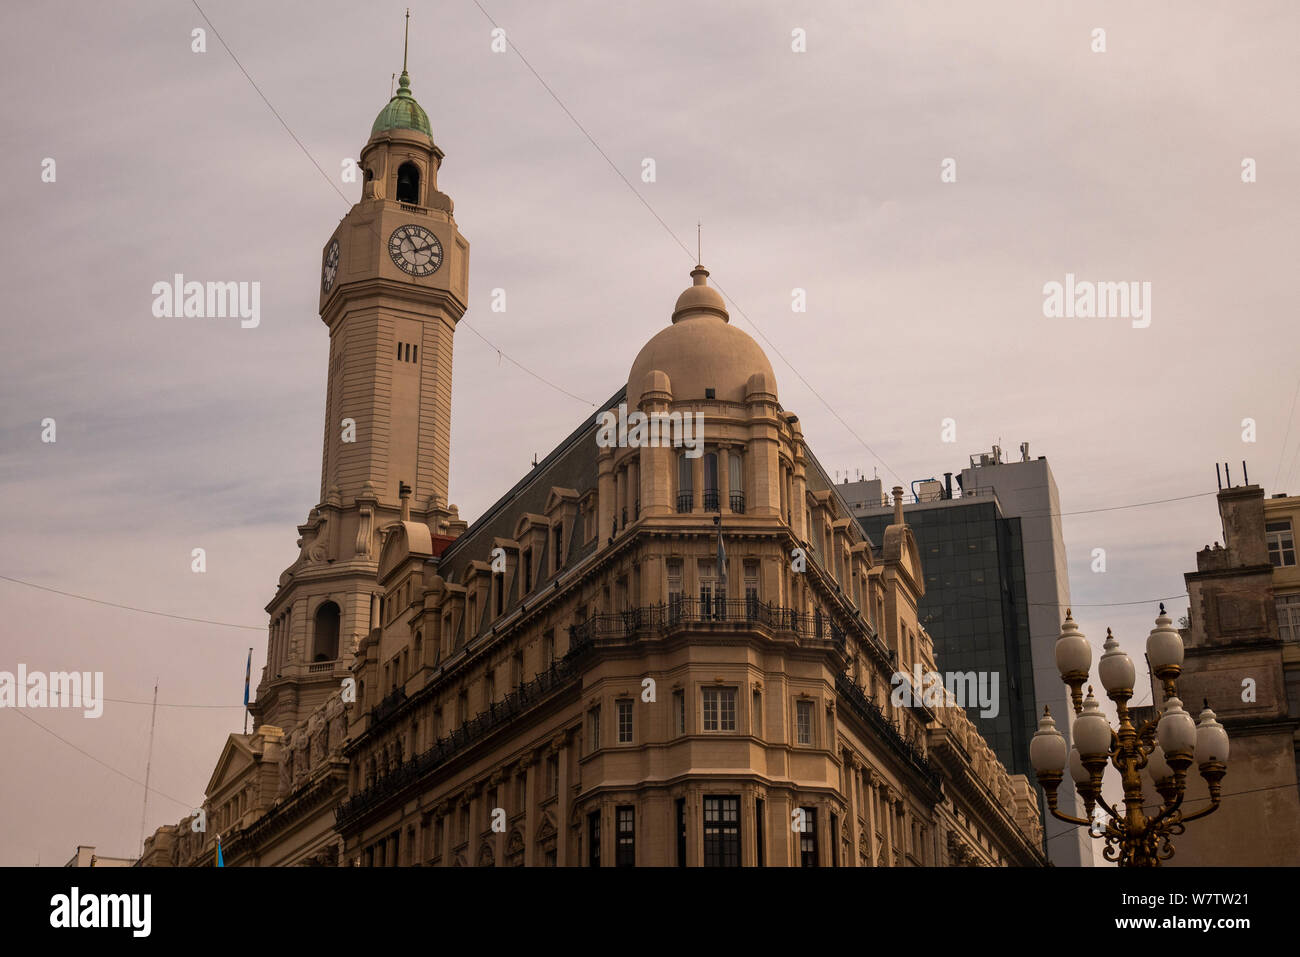 The palace of the Legislature of the City is one of the most striking buildings in Buenos Aires. It is a national historical monument. Stock Photo